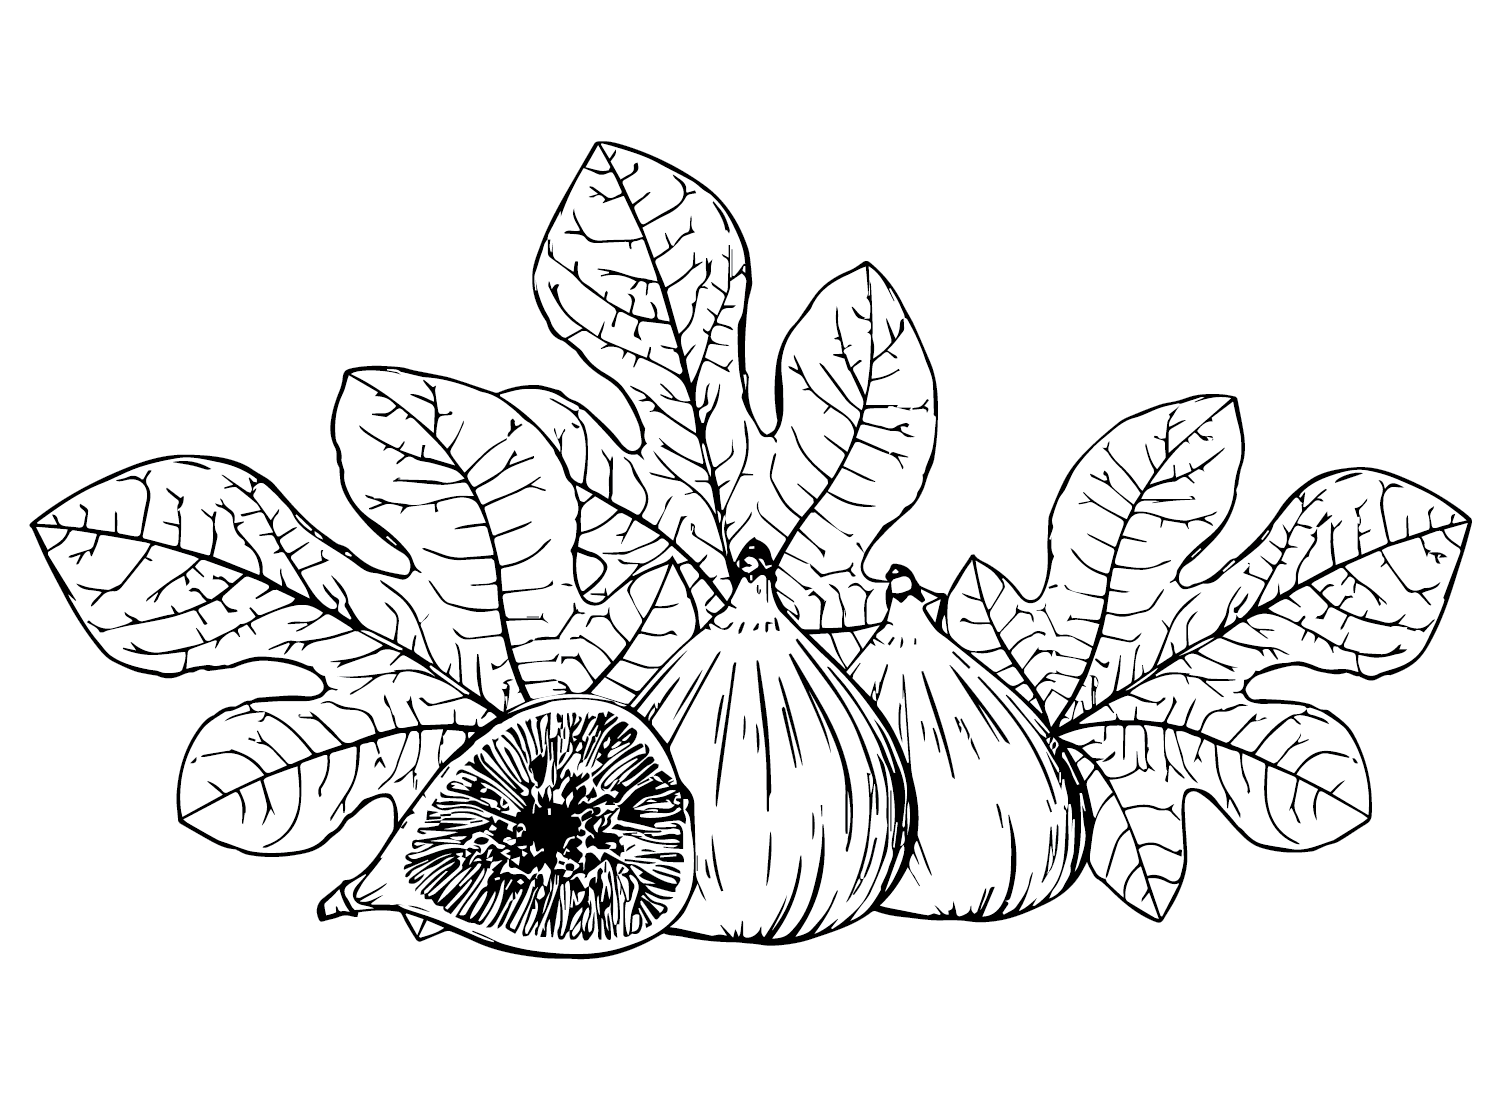 Leaves and Figs Coloring Page